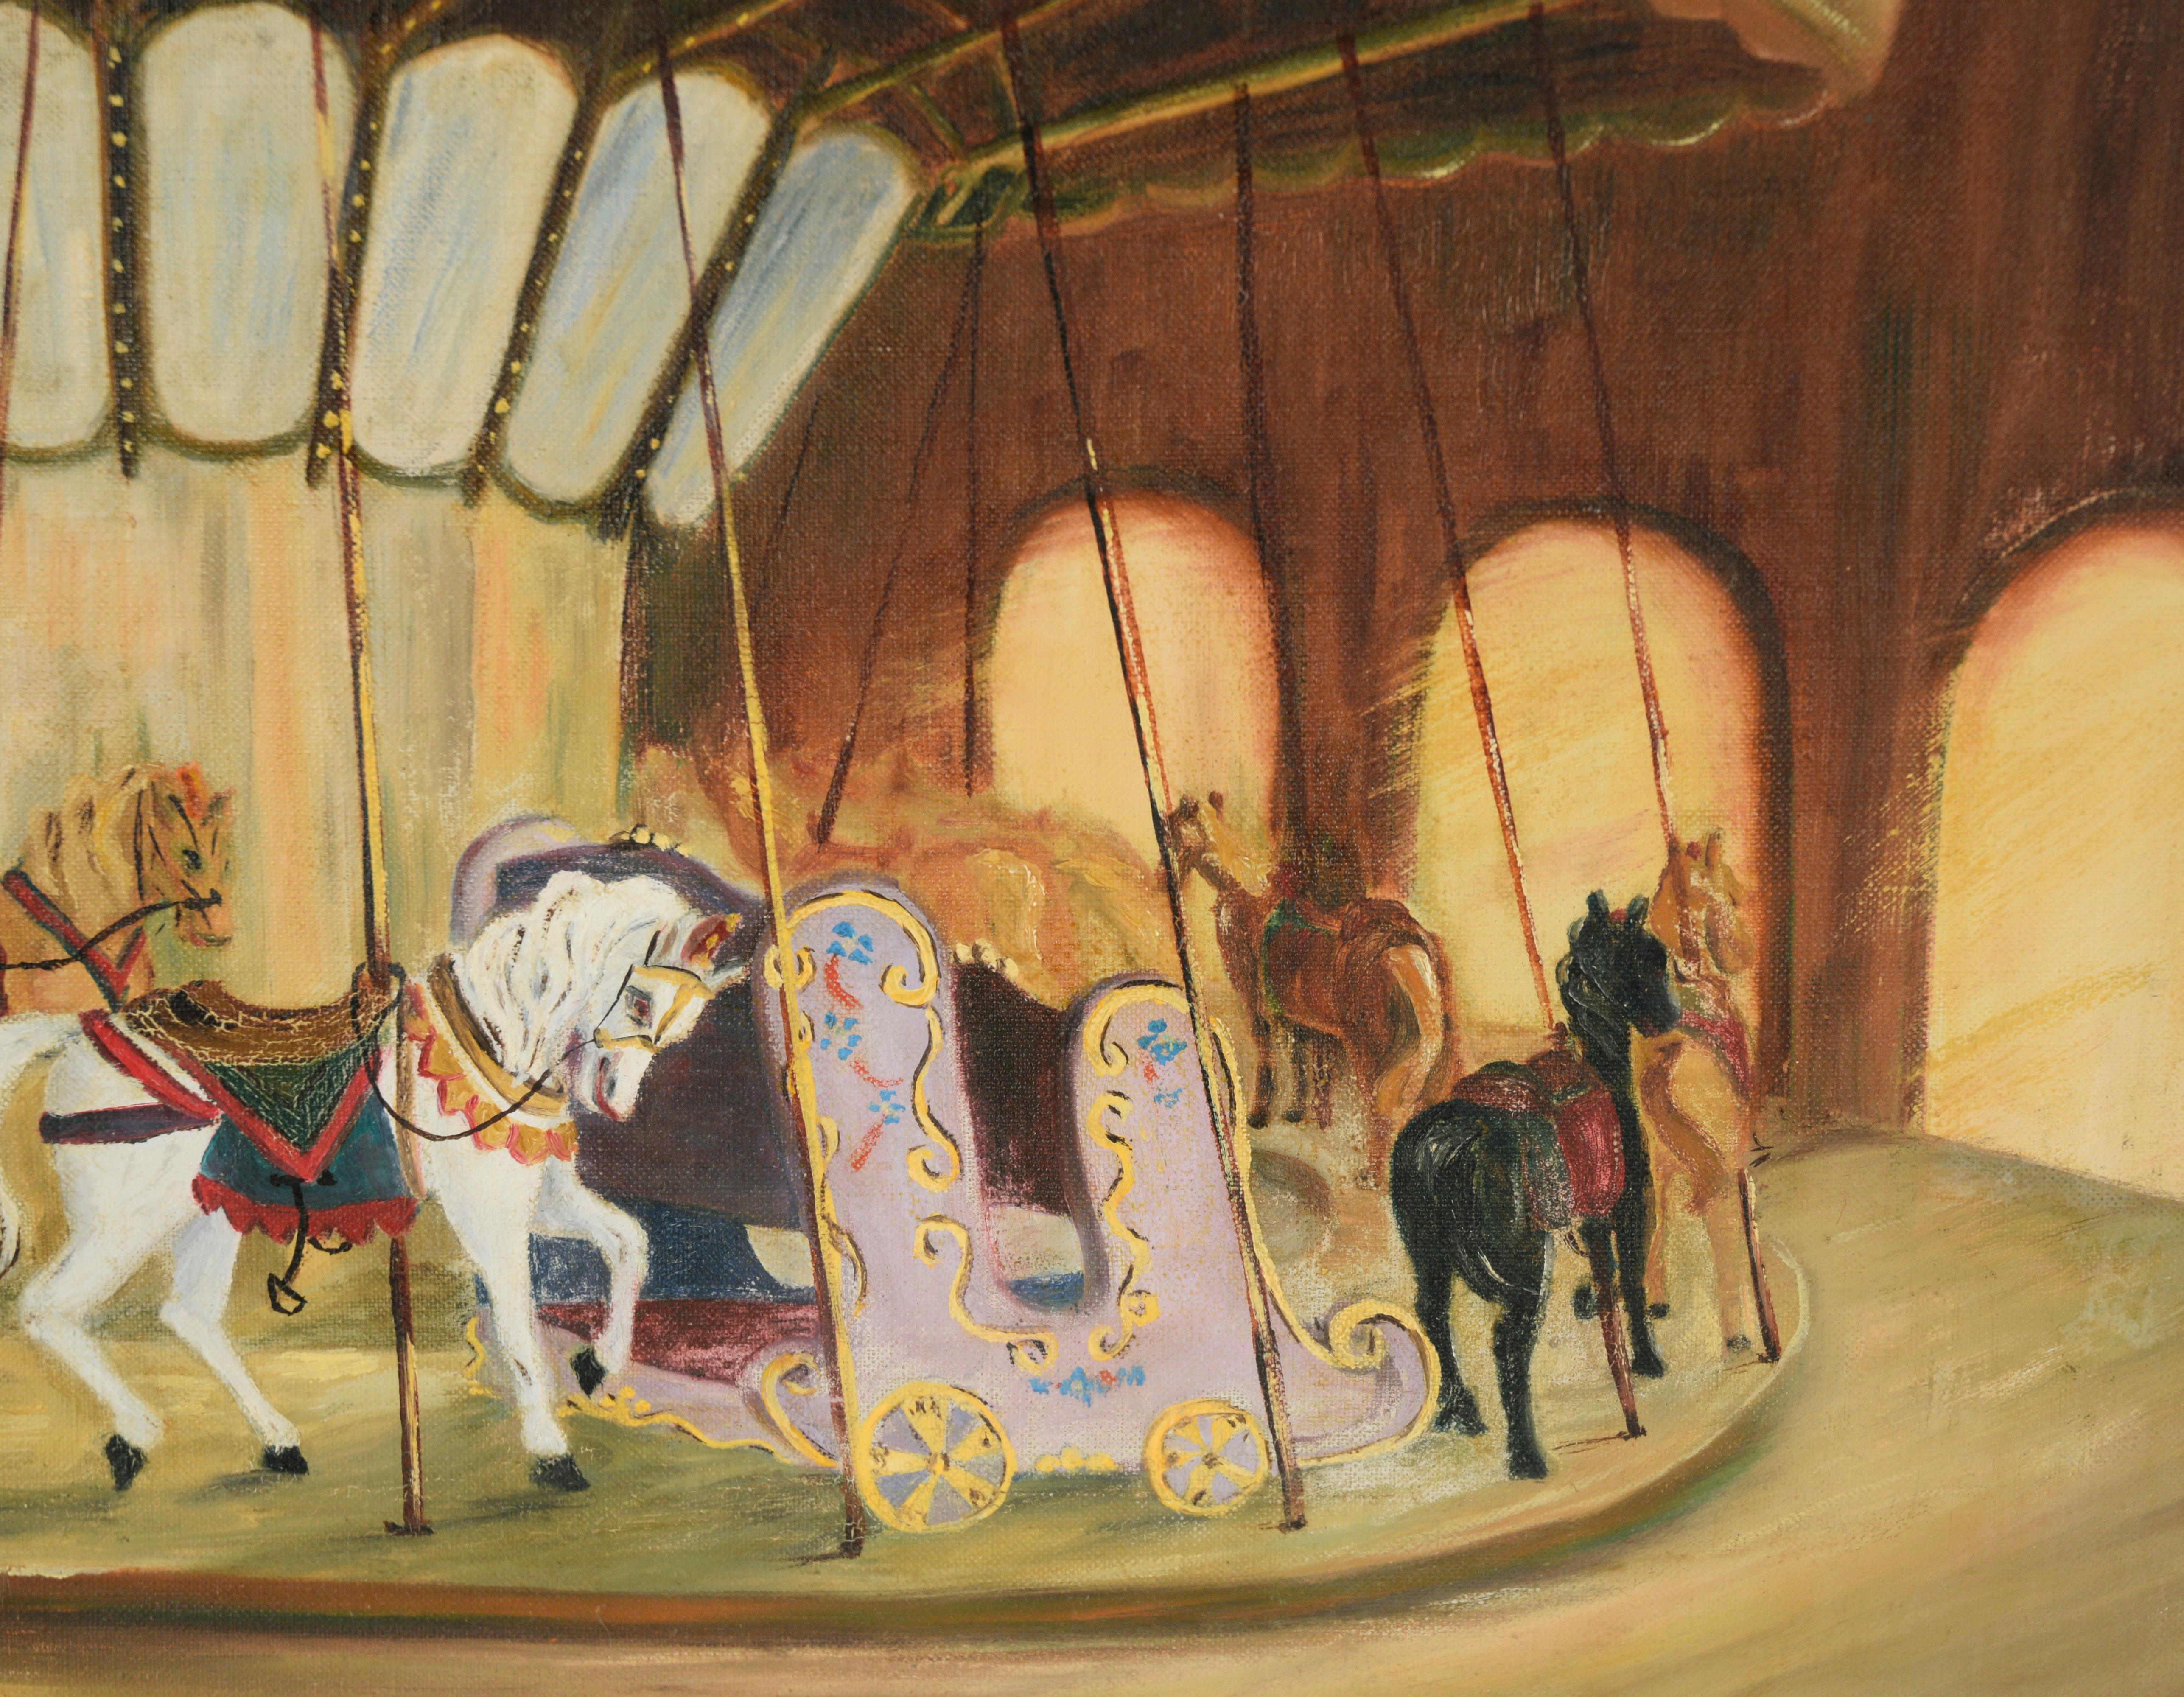 White Horse Carousel, 1956 - Oil On Canvas

Oil painting of an empty carousel ride, a single white horse gleams in the center. Three doorways are seen to the right, with sunlight emanating through. 

Signed 